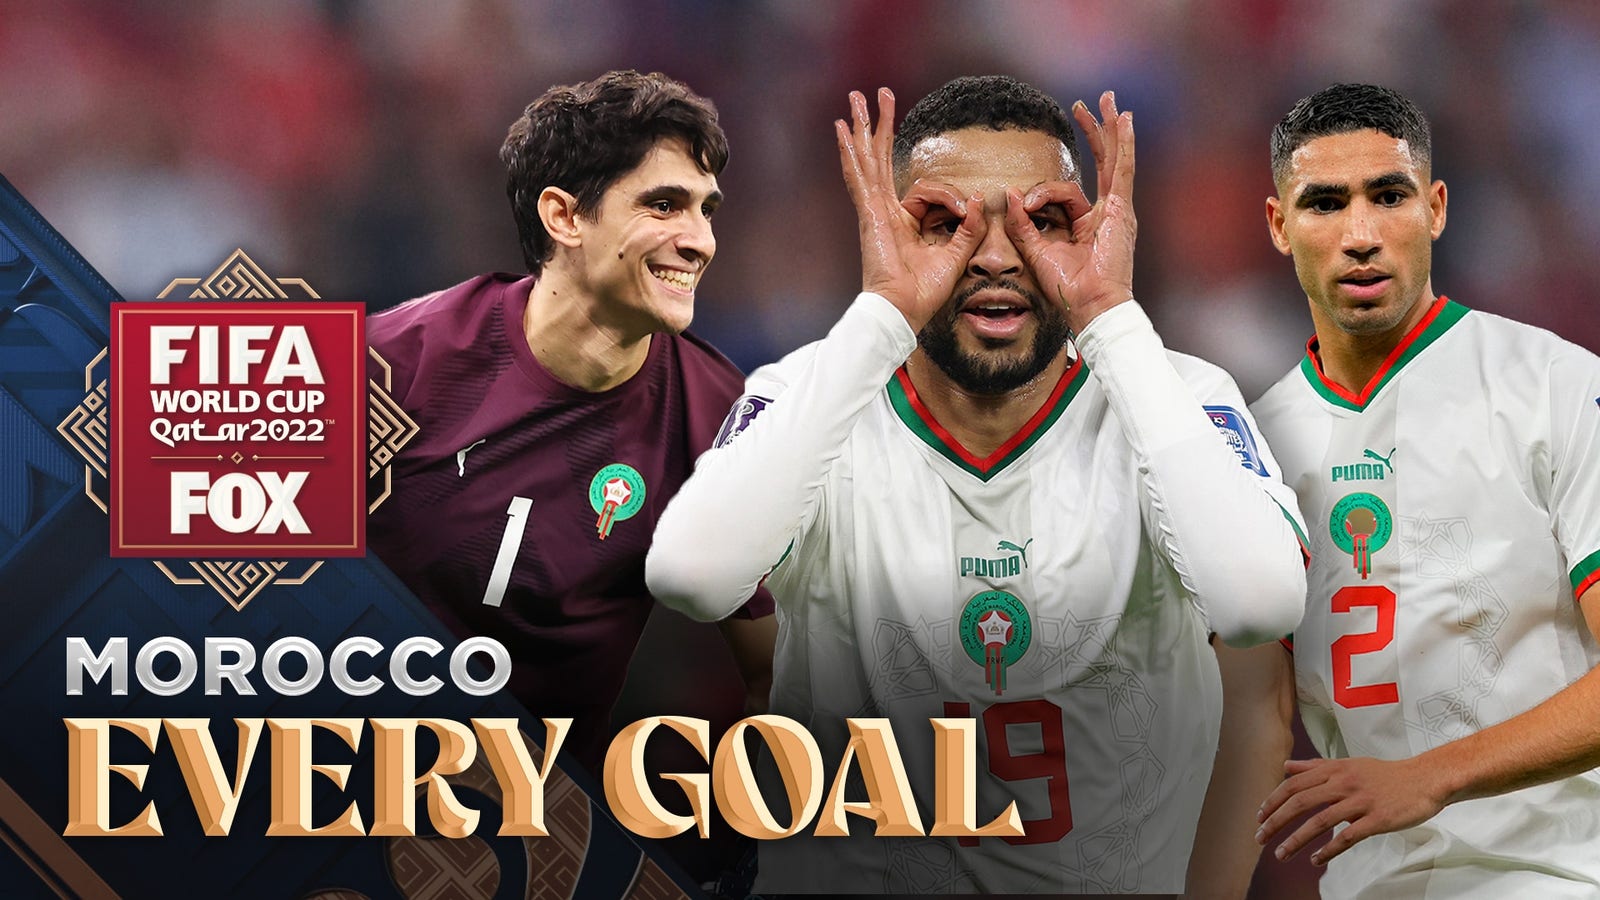 Every goal scored by Morocco in the 2022 FIFA Men's World Cup